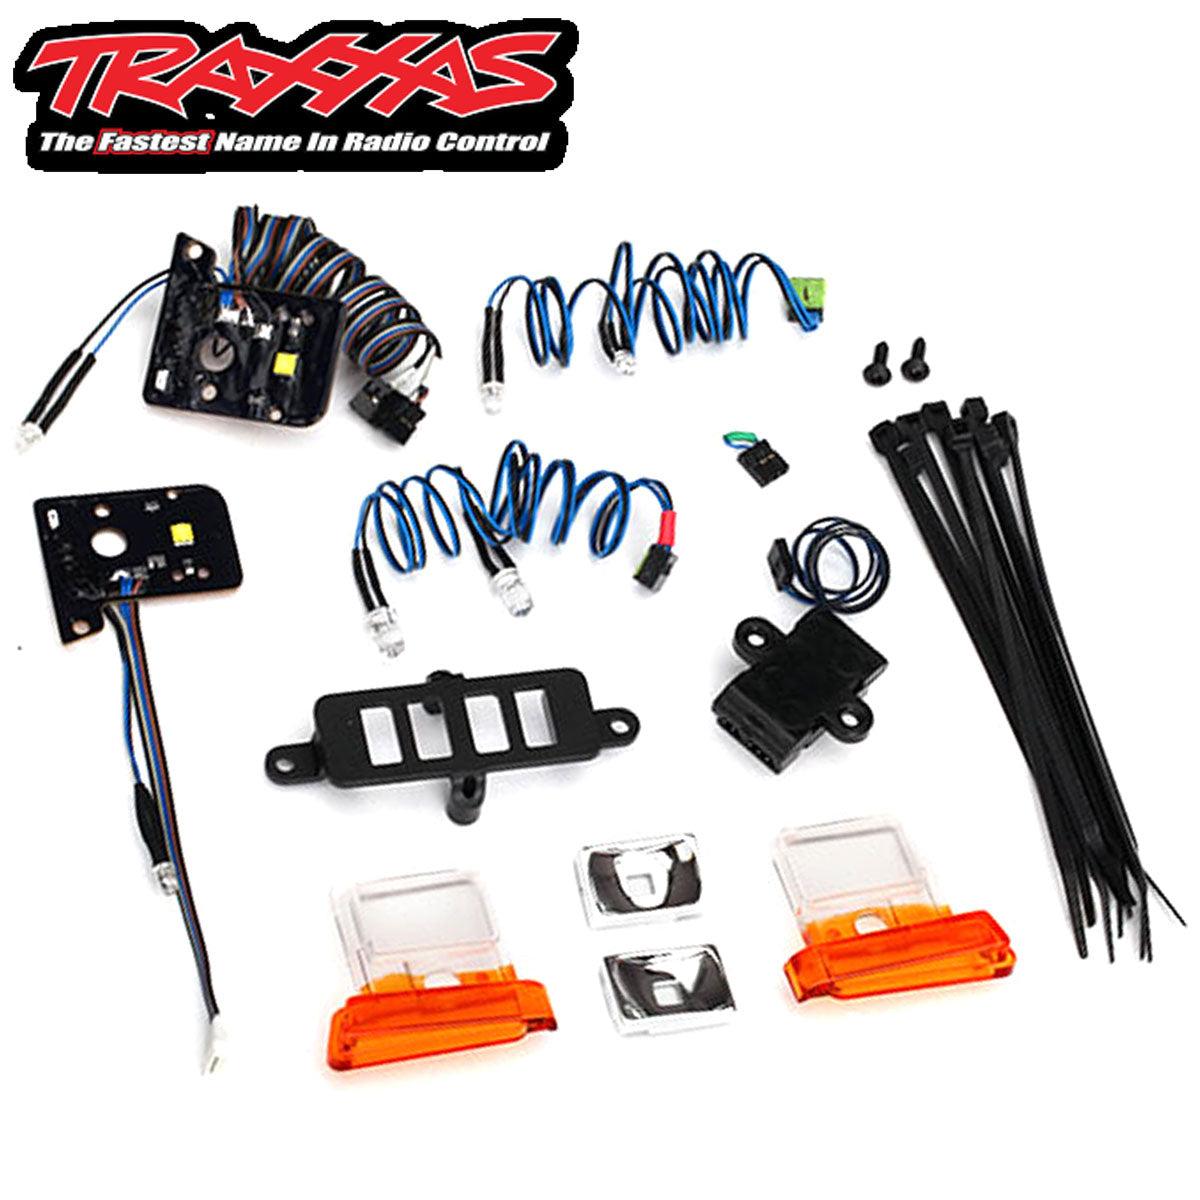 Traxxas 8036 Led Light Set For TRX-4 #8010 Requires #8028 - PowerHobby